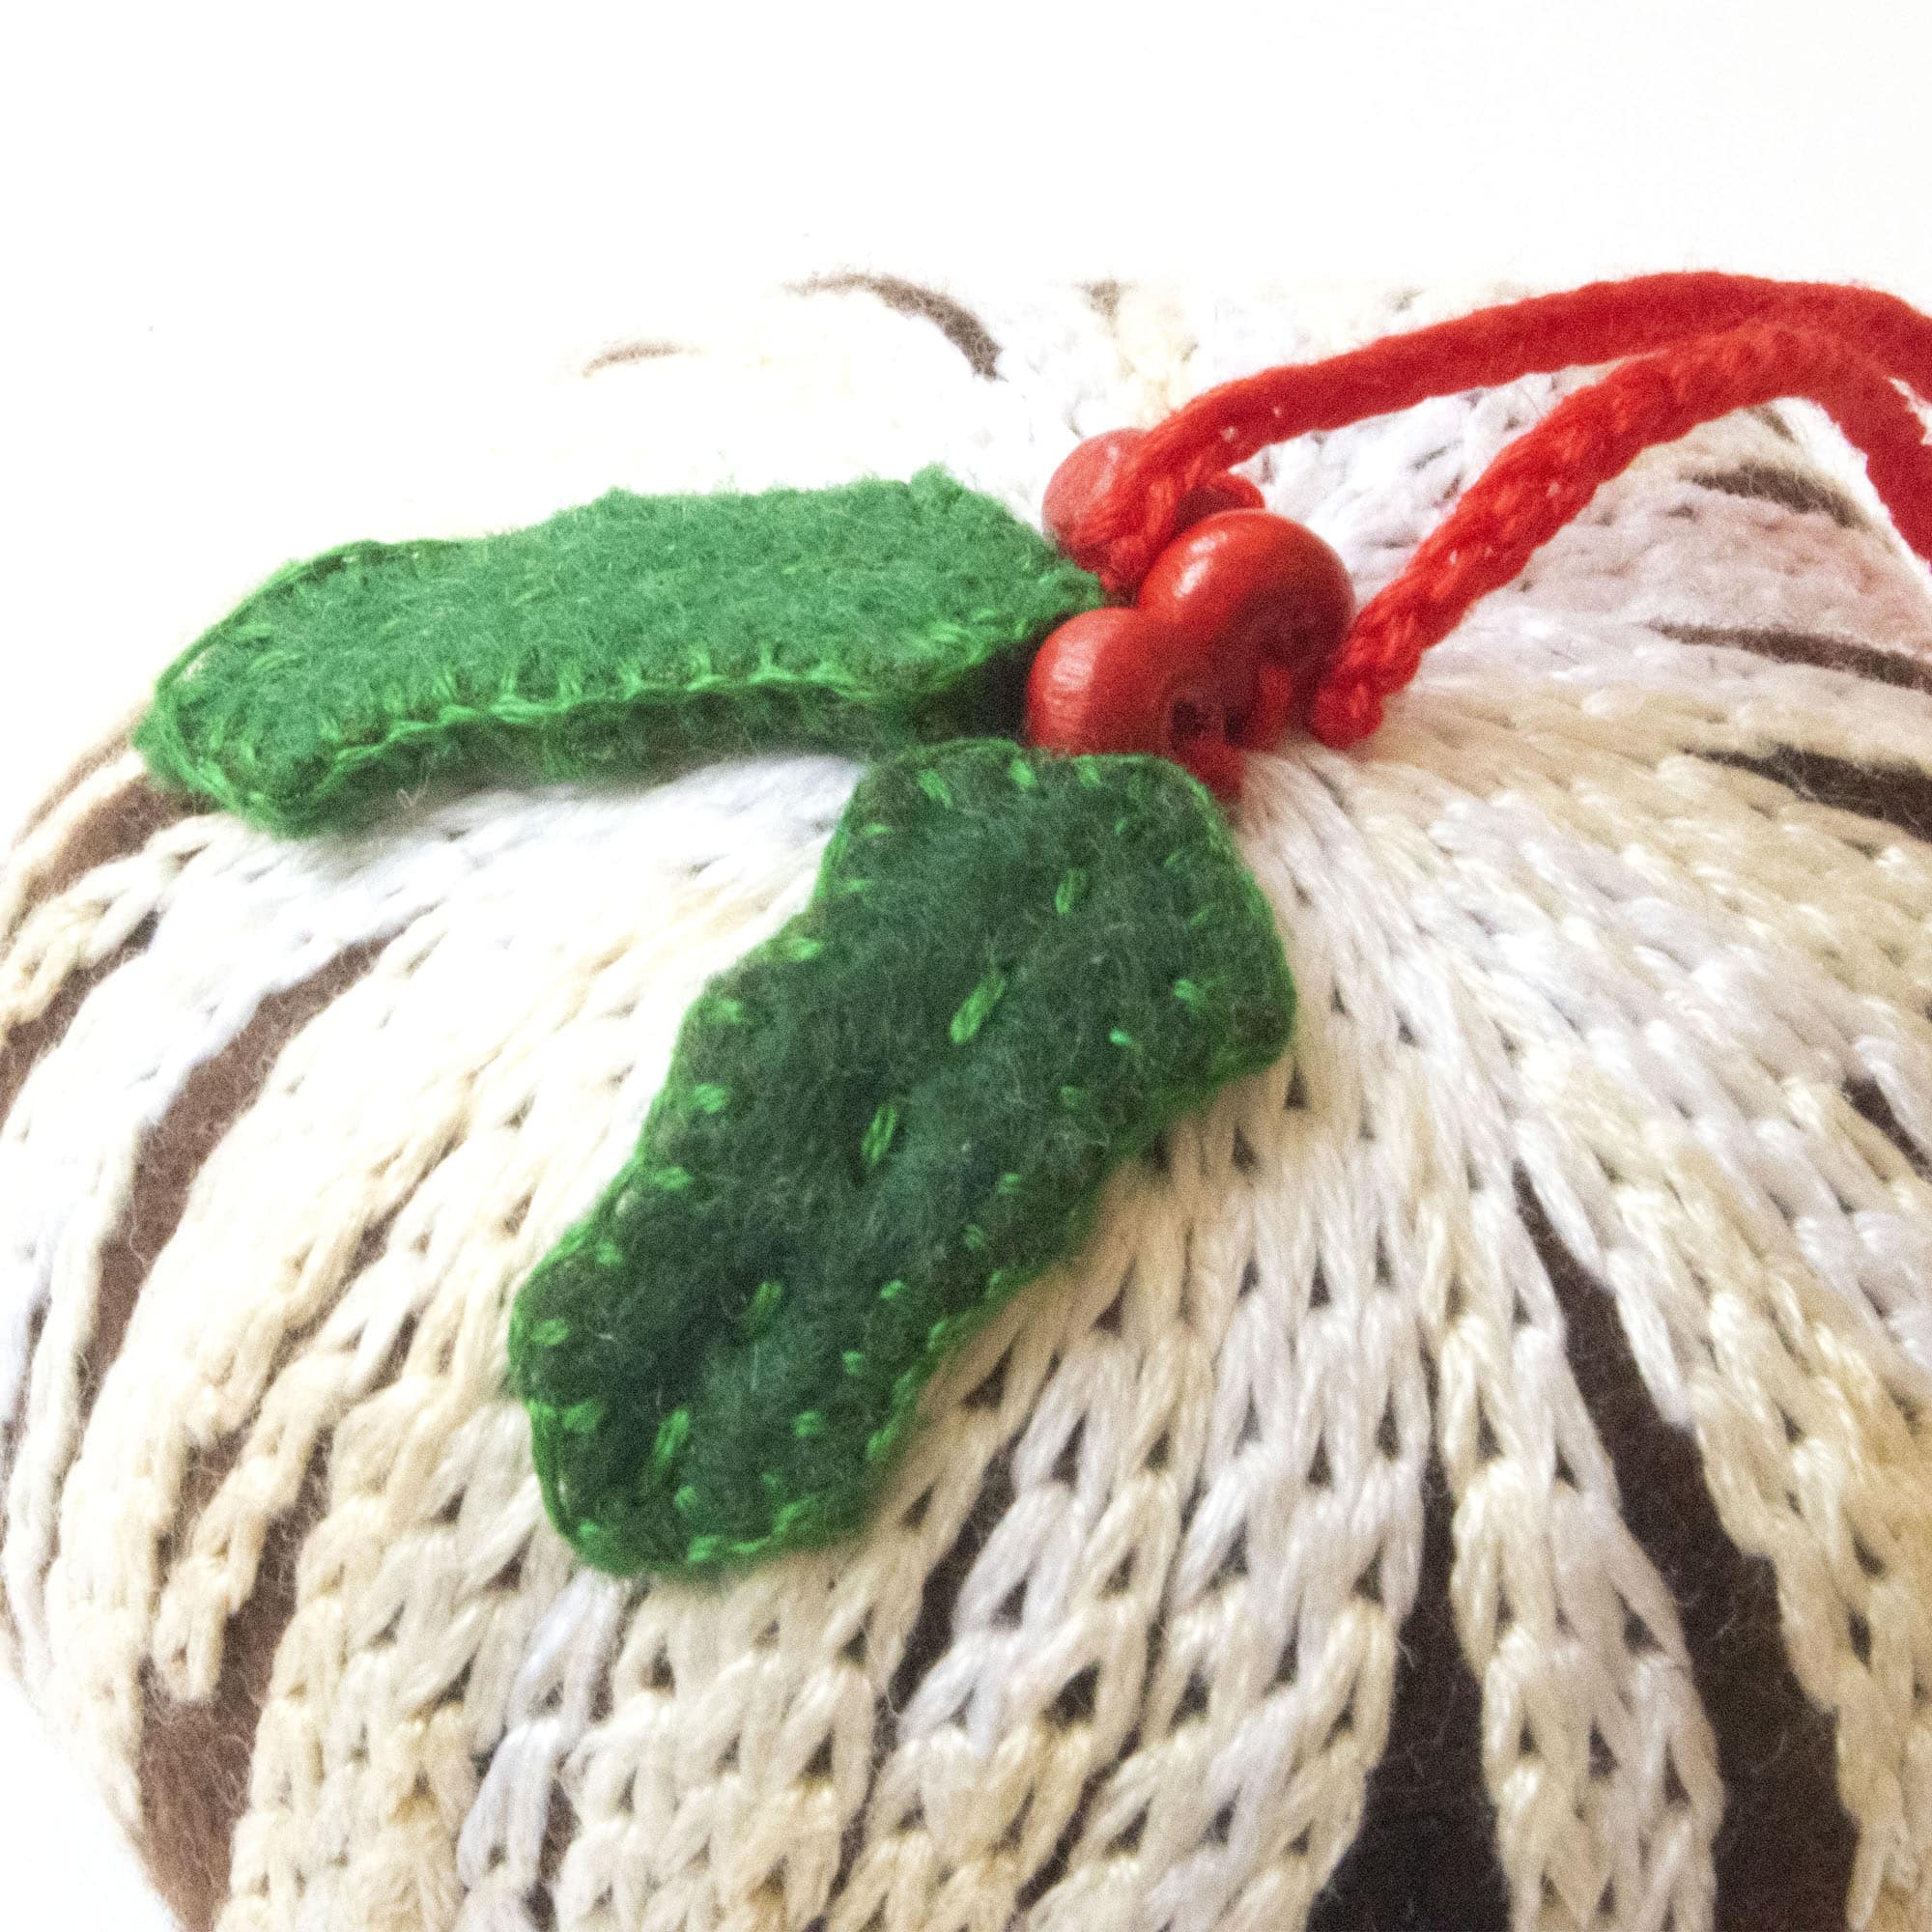 Fine-Cell-Work-Hand-Embroidered-Christmas-Tree-Decoration-Christmas-Pudding-Icing-Green-Holly-Leaf-Red-Berries.jpg